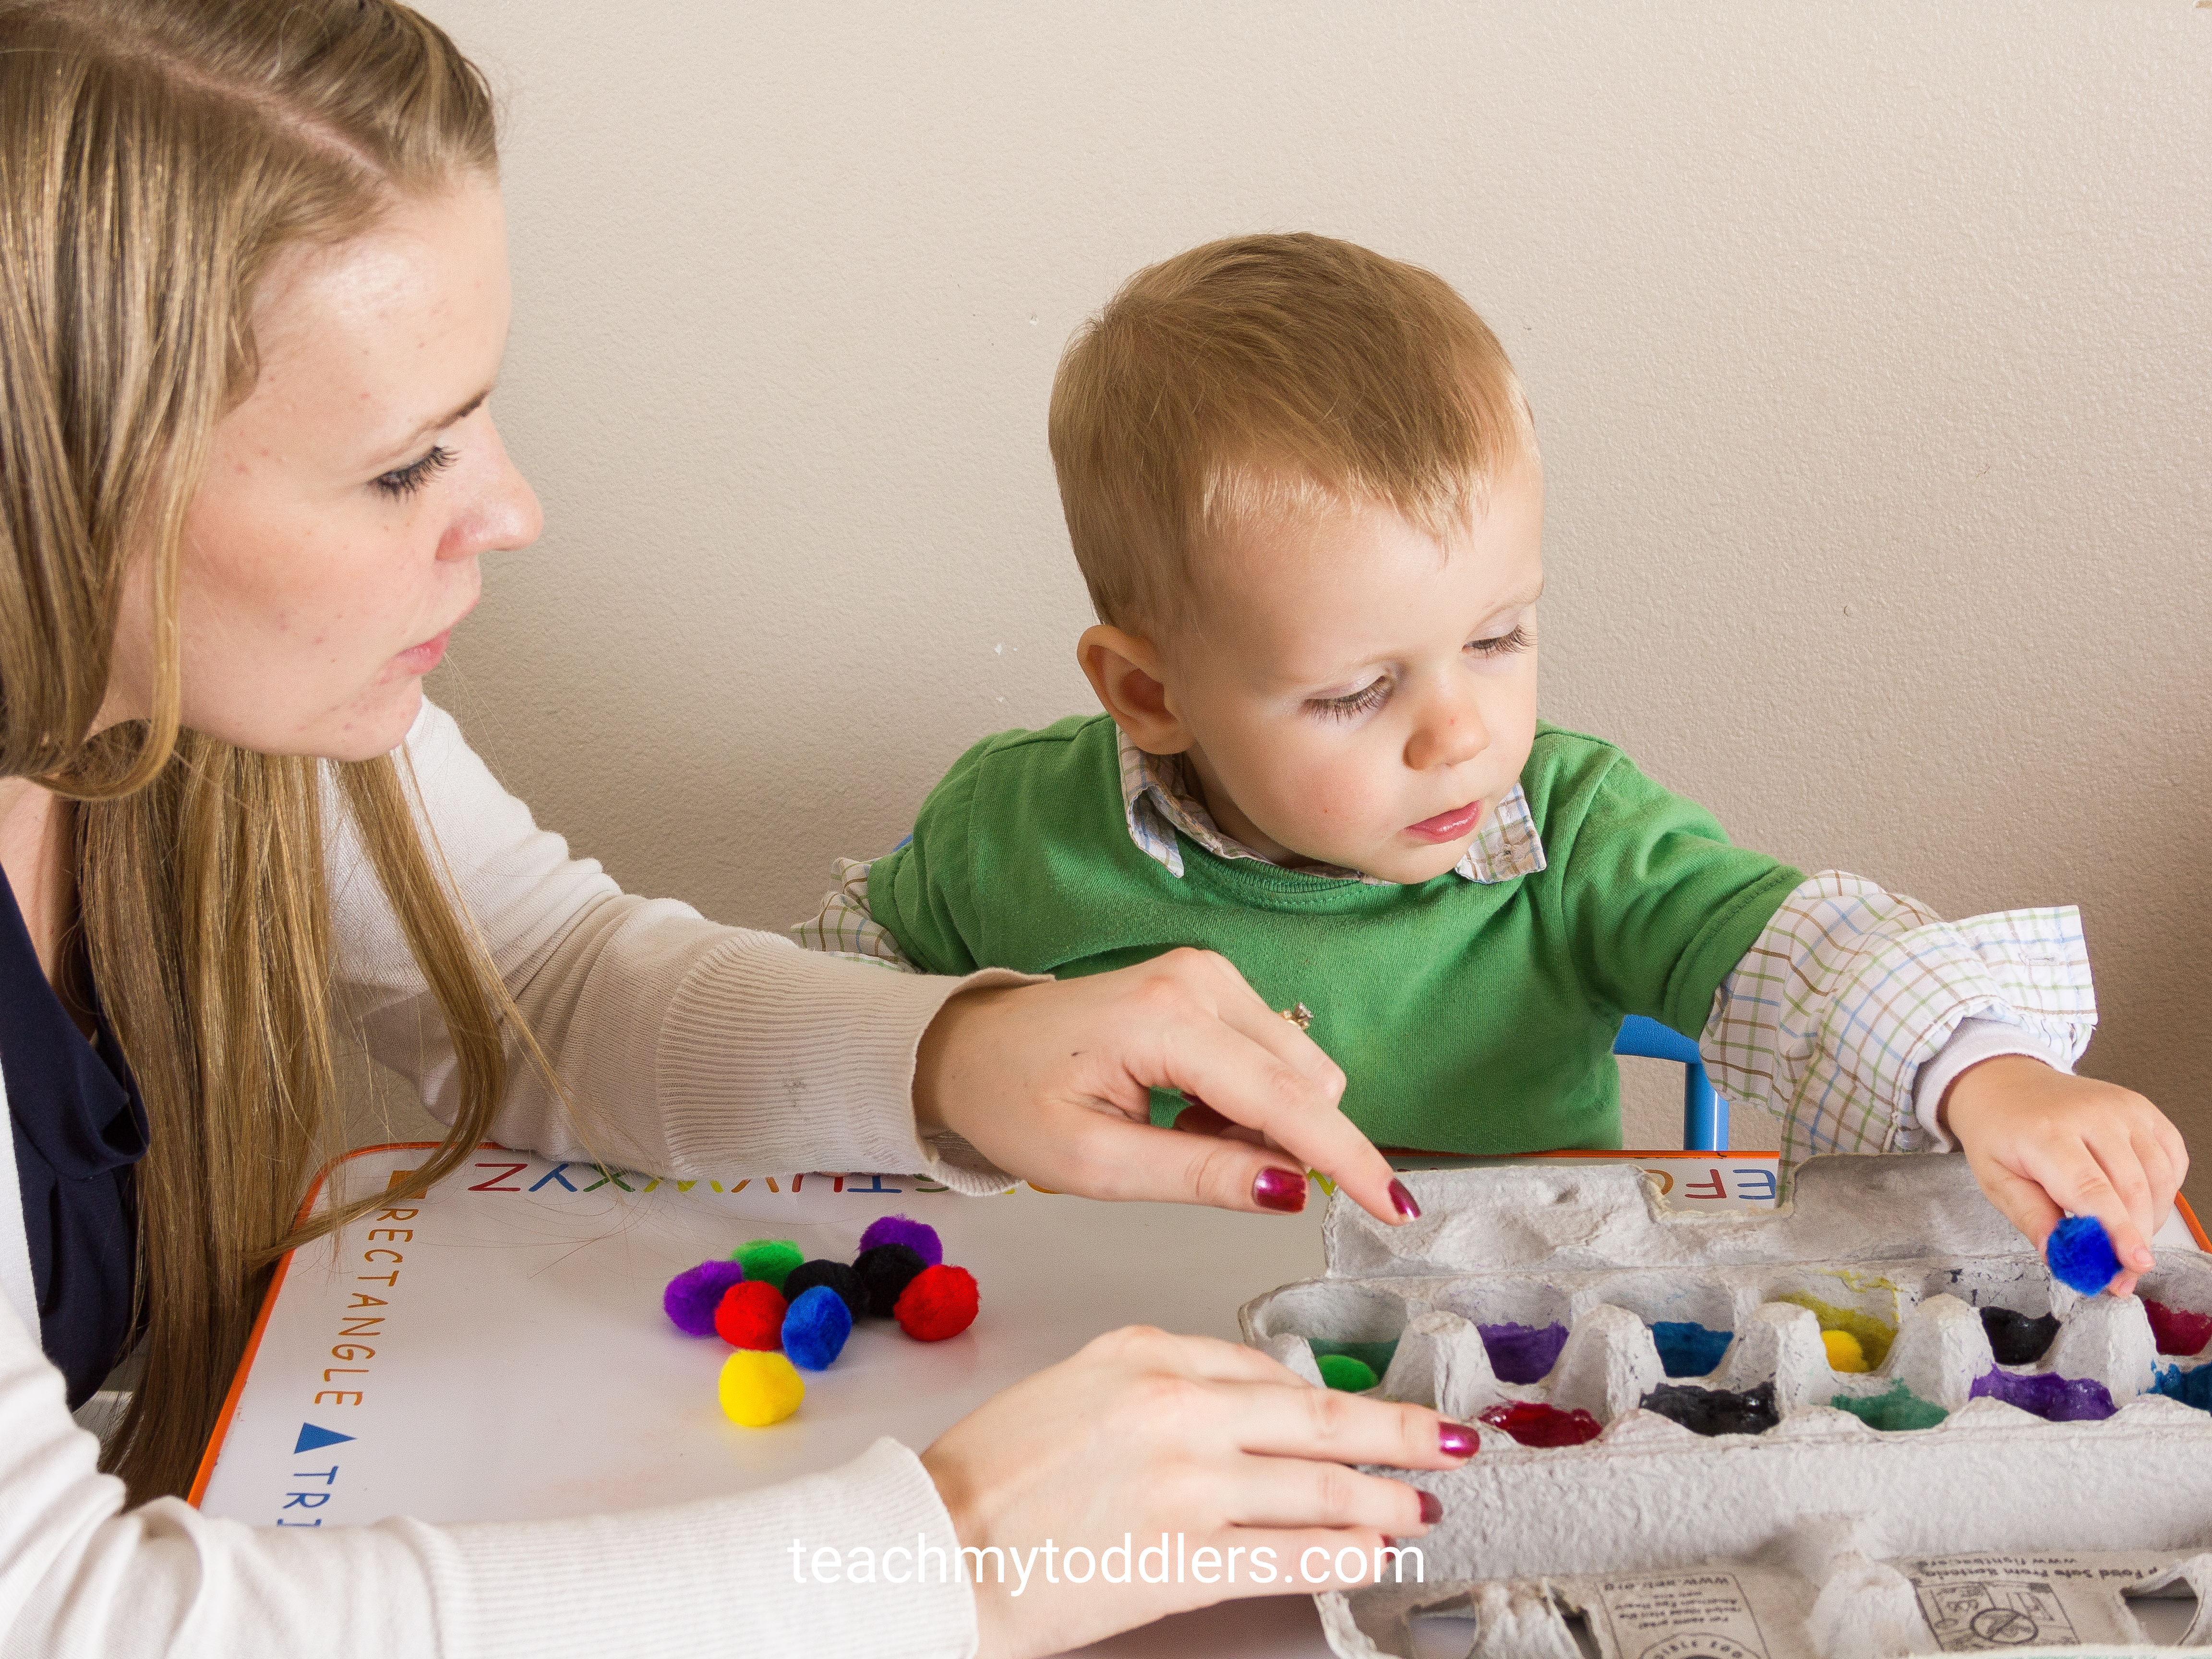 Teach your toddler colors with this egg carton and pom poms